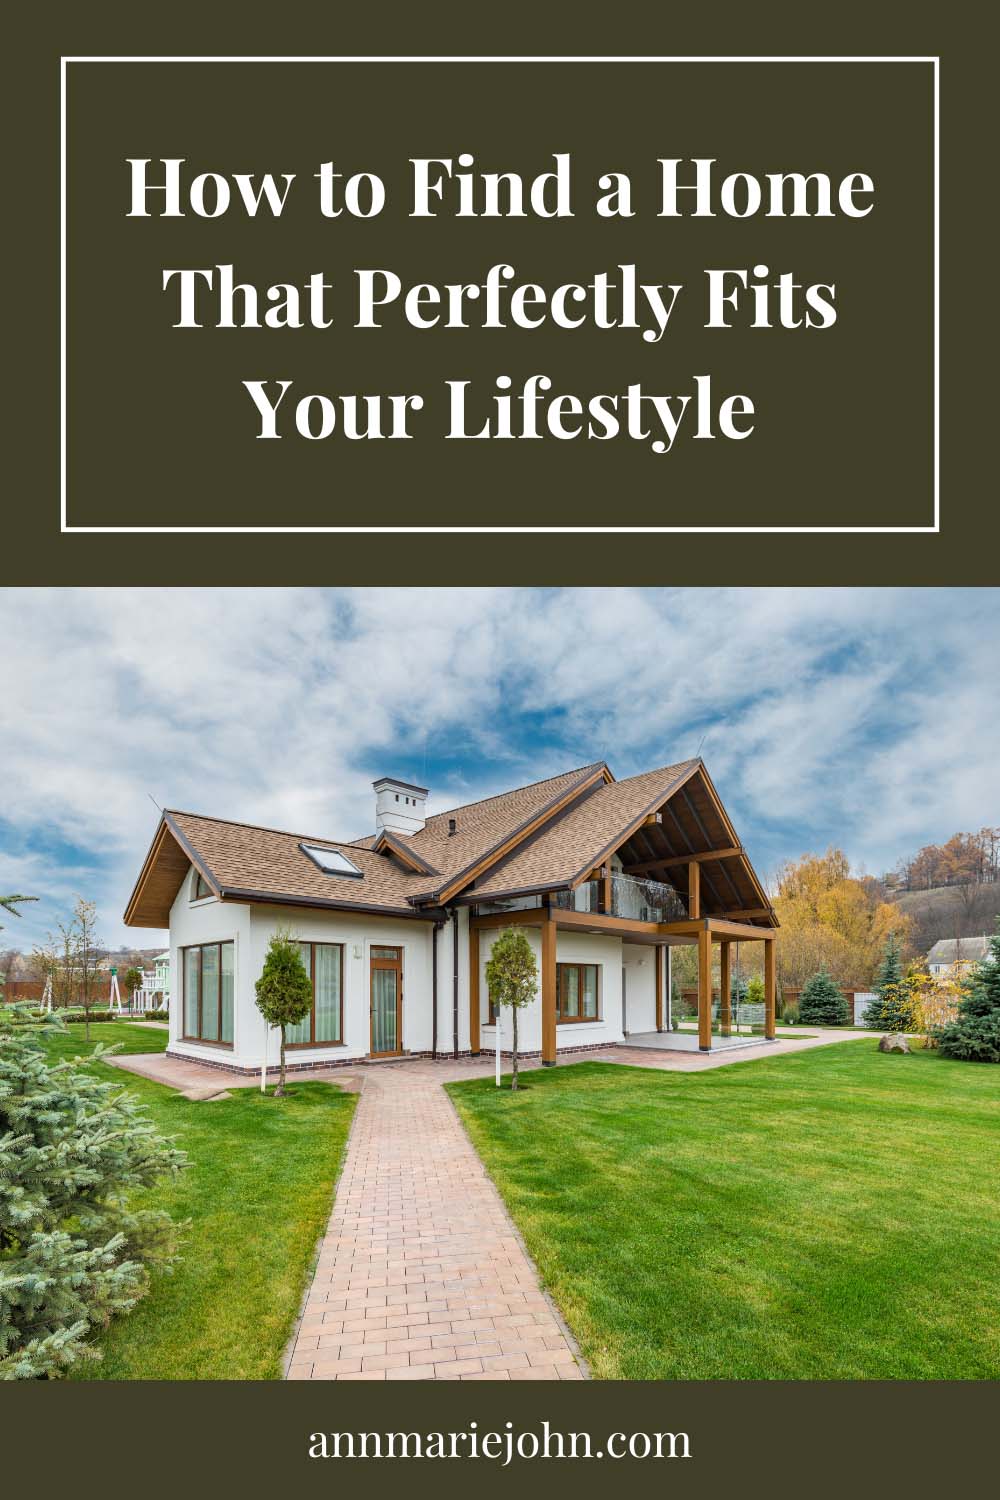 How to Find a Home That Perfectly Fits Your Lifestyle